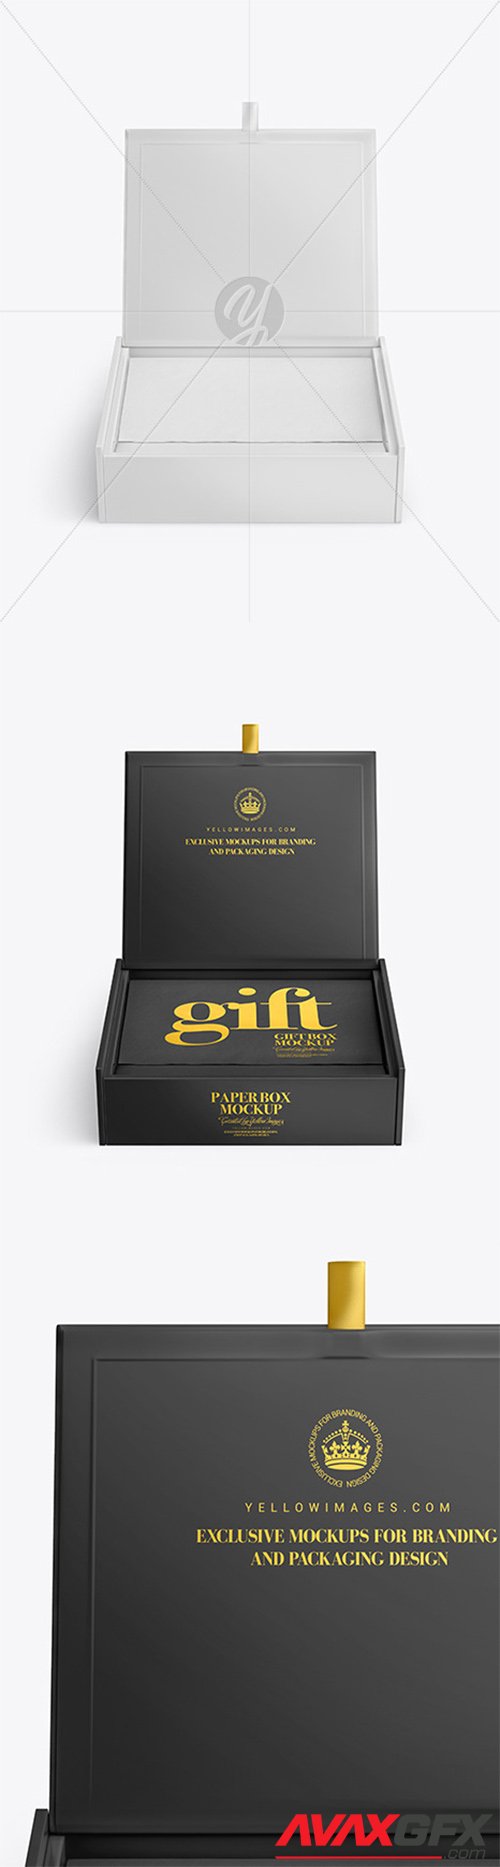 Download Opened Glossy Box Mockup 52555 Avaxgfx All Downloads That You Need In One Place Graphic From Nitroflare Rapidgator Yellowimages Mockups